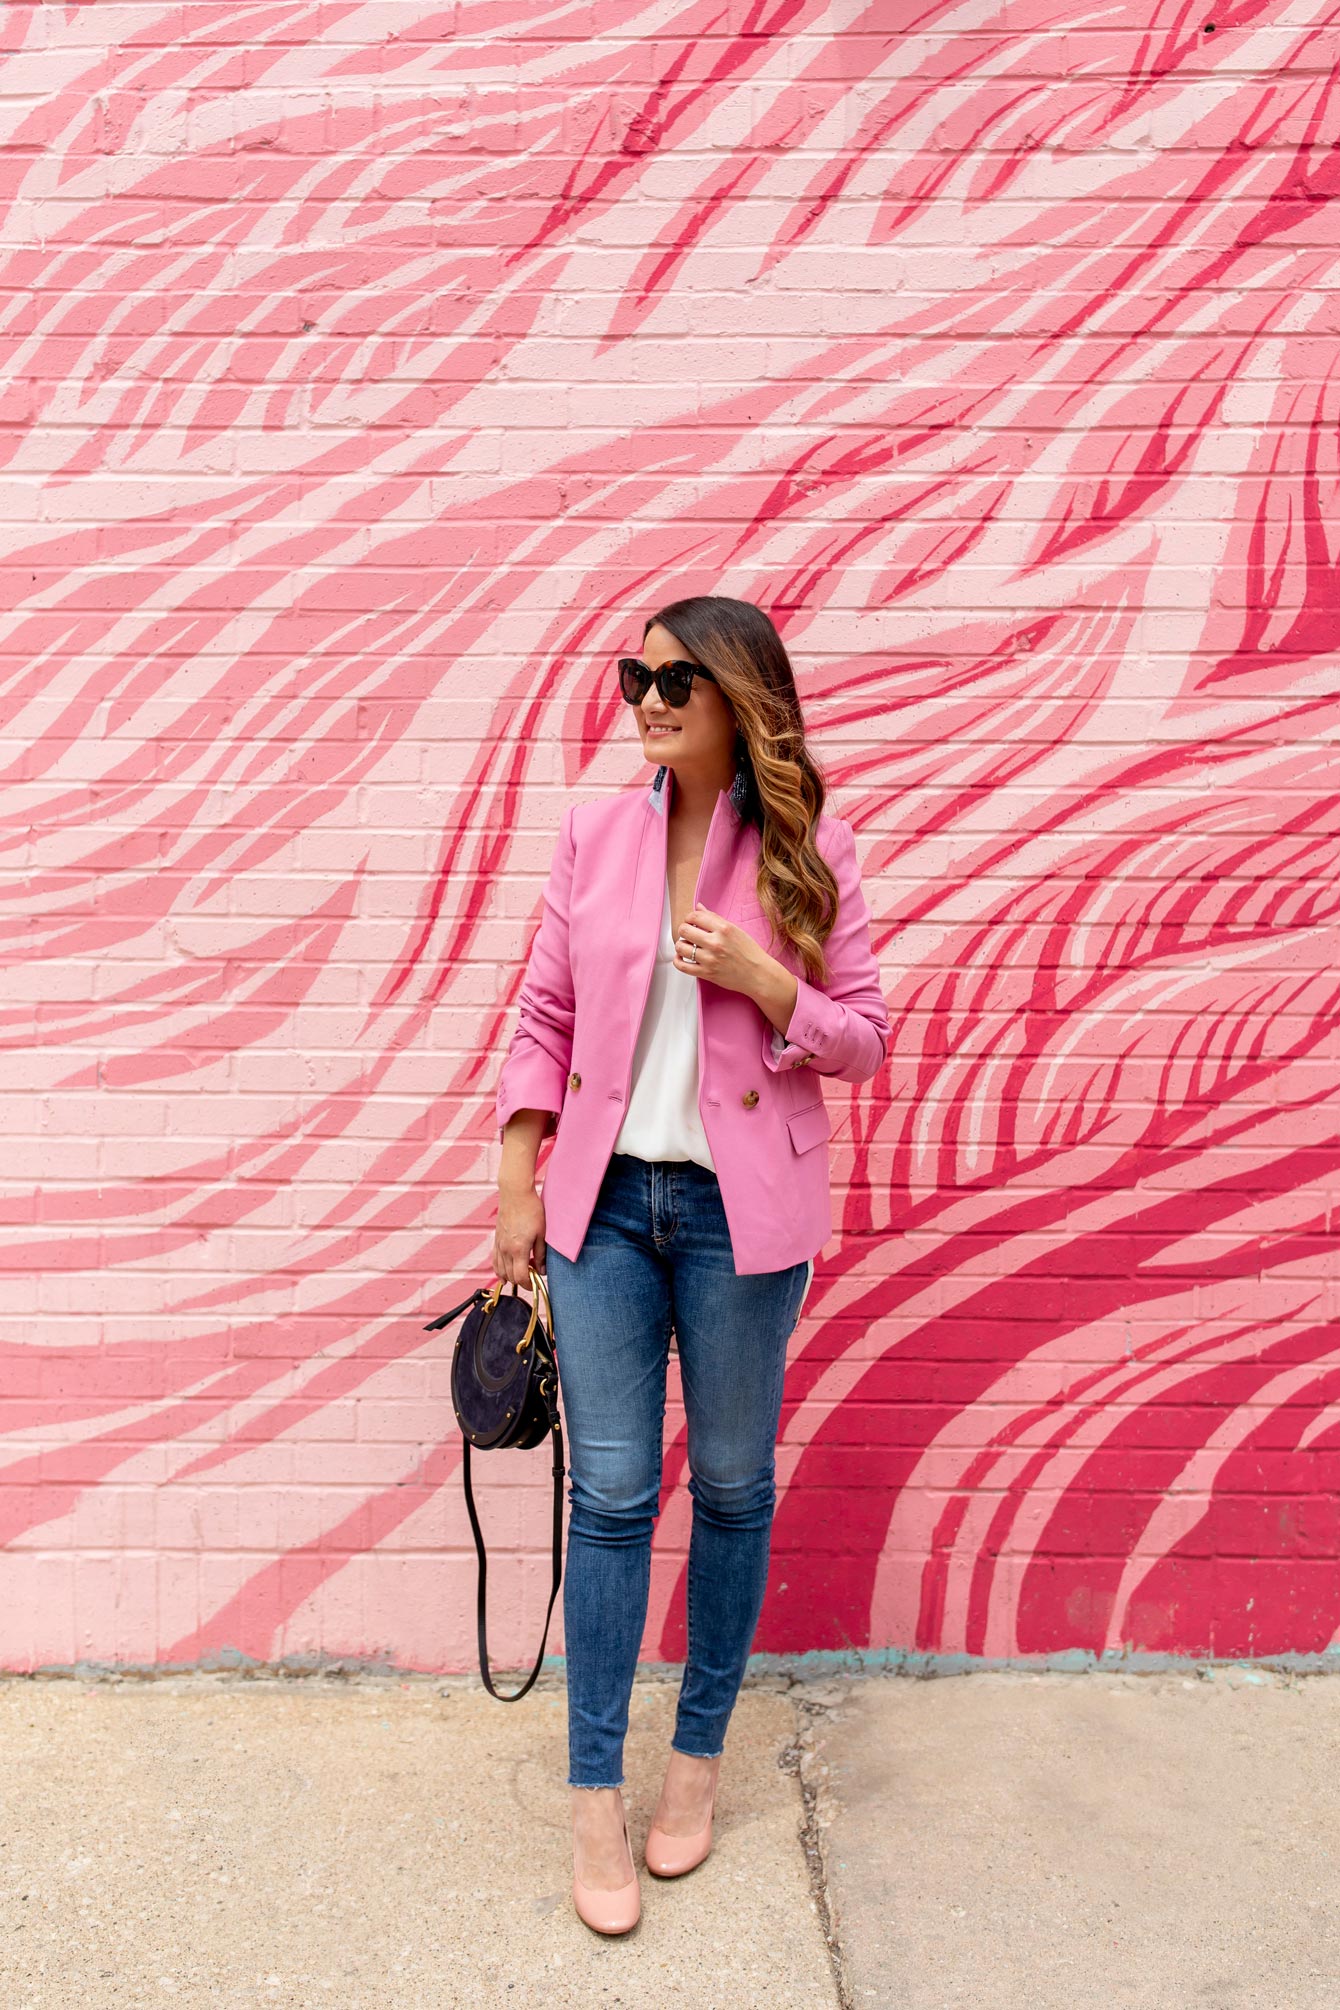 Multicolor Pink Wall Chicago